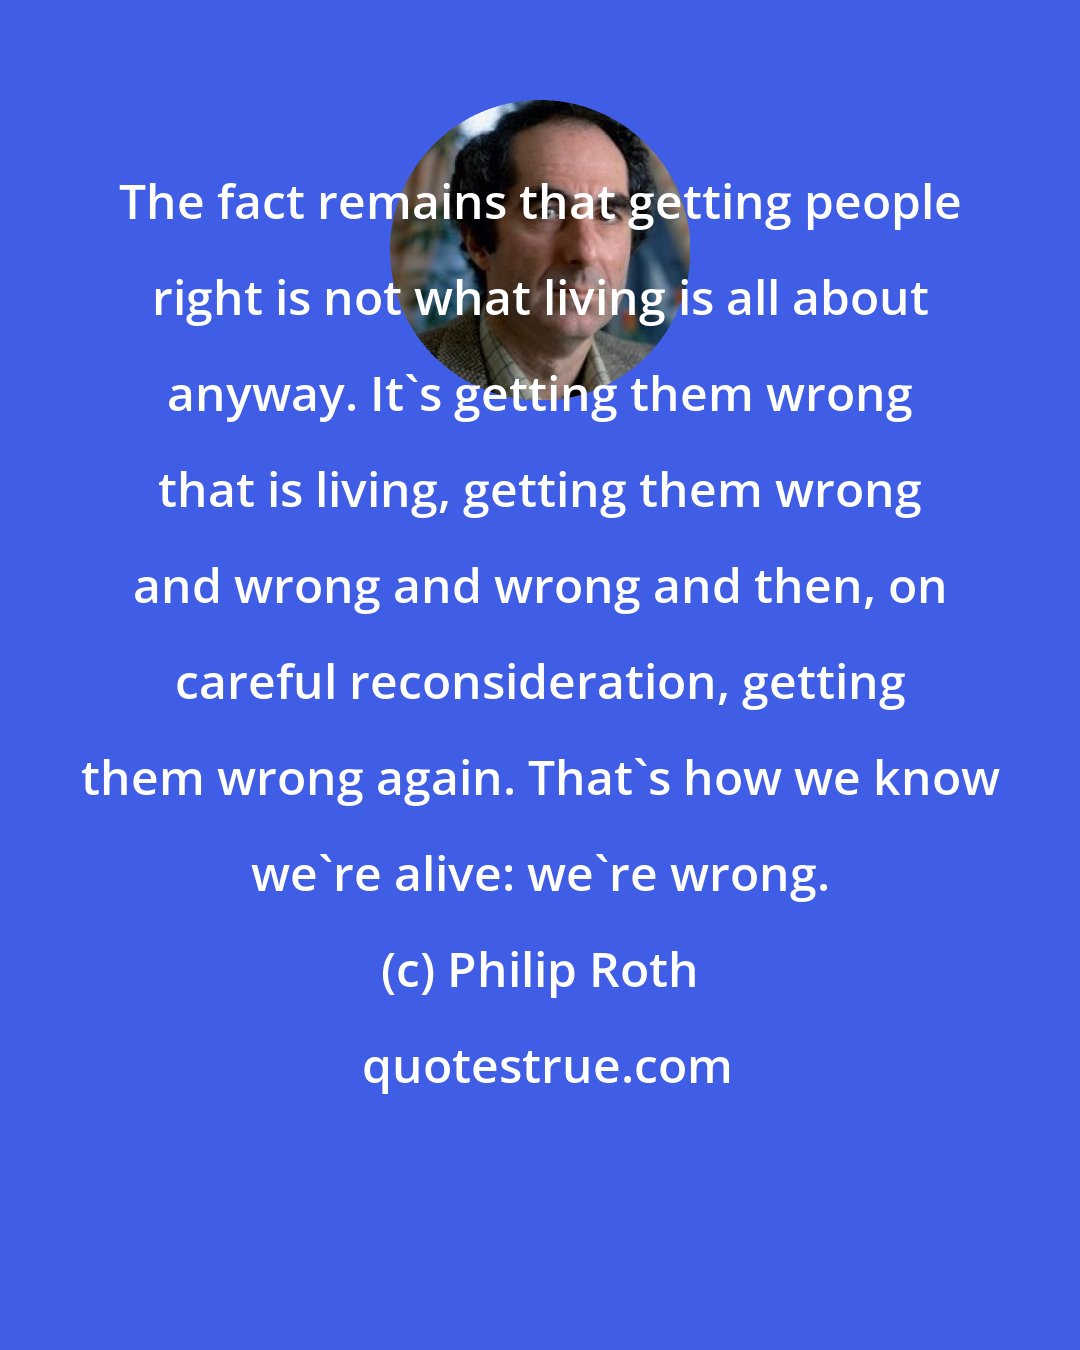 Philip Roth: The fact remains that getting people right is not what living is all about anyway. It's getting them wrong that is living, getting them wrong and wrong and wrong and then, on careful reconsideration, getting them wrong again. That's how we know we're alive: we're wrong.